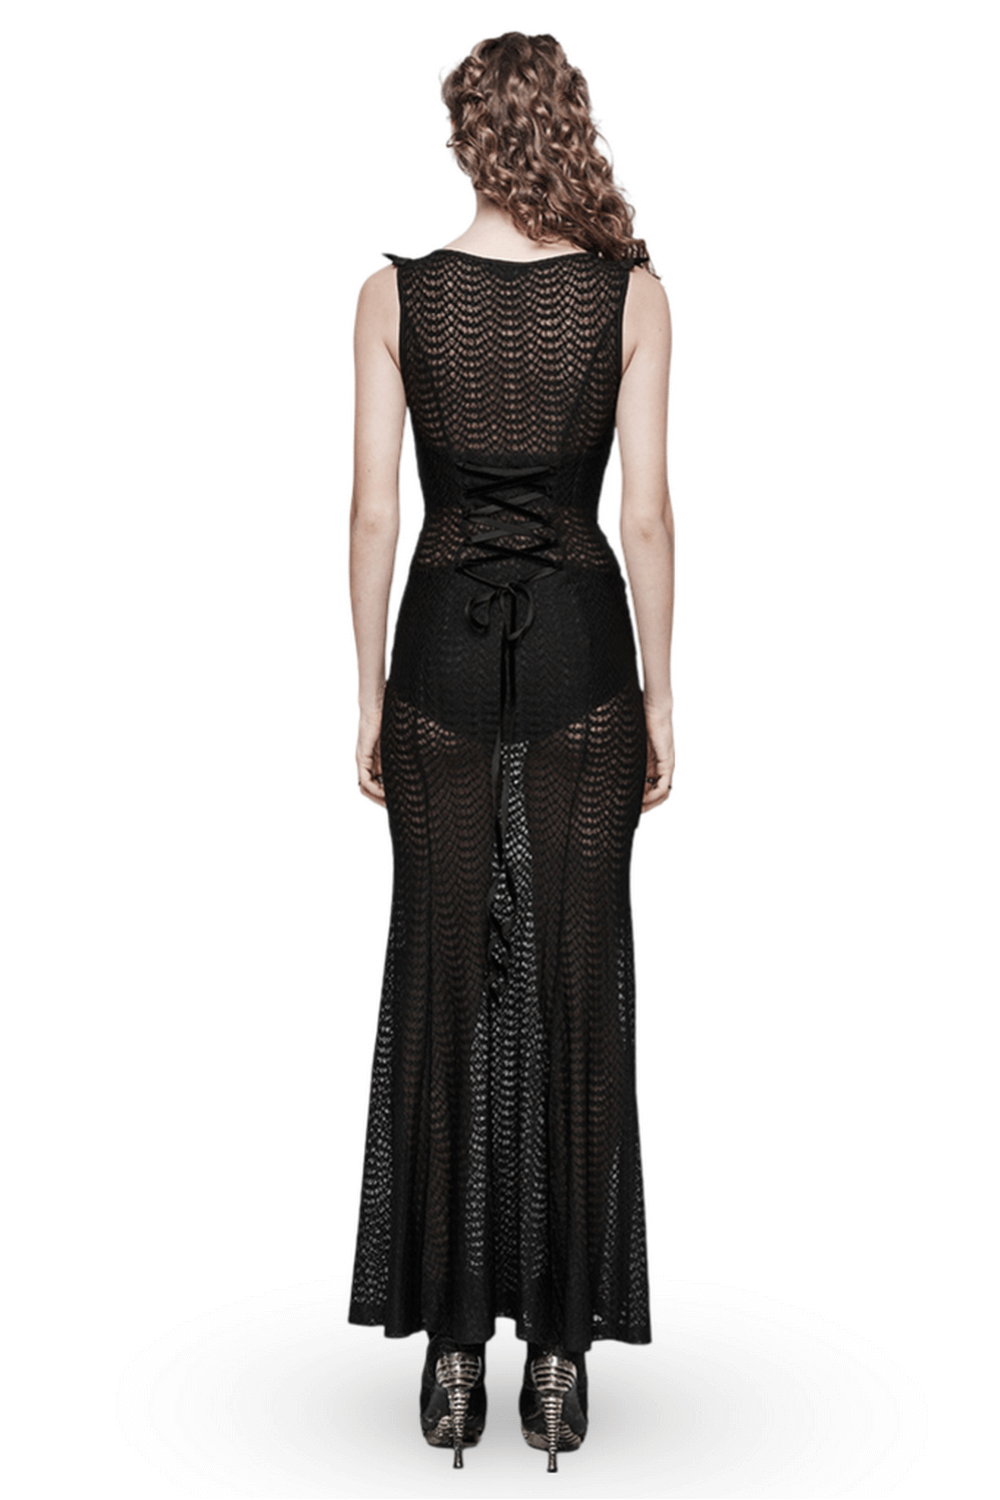 Gothic Fin See-Through Maxi Dress with Corset Back